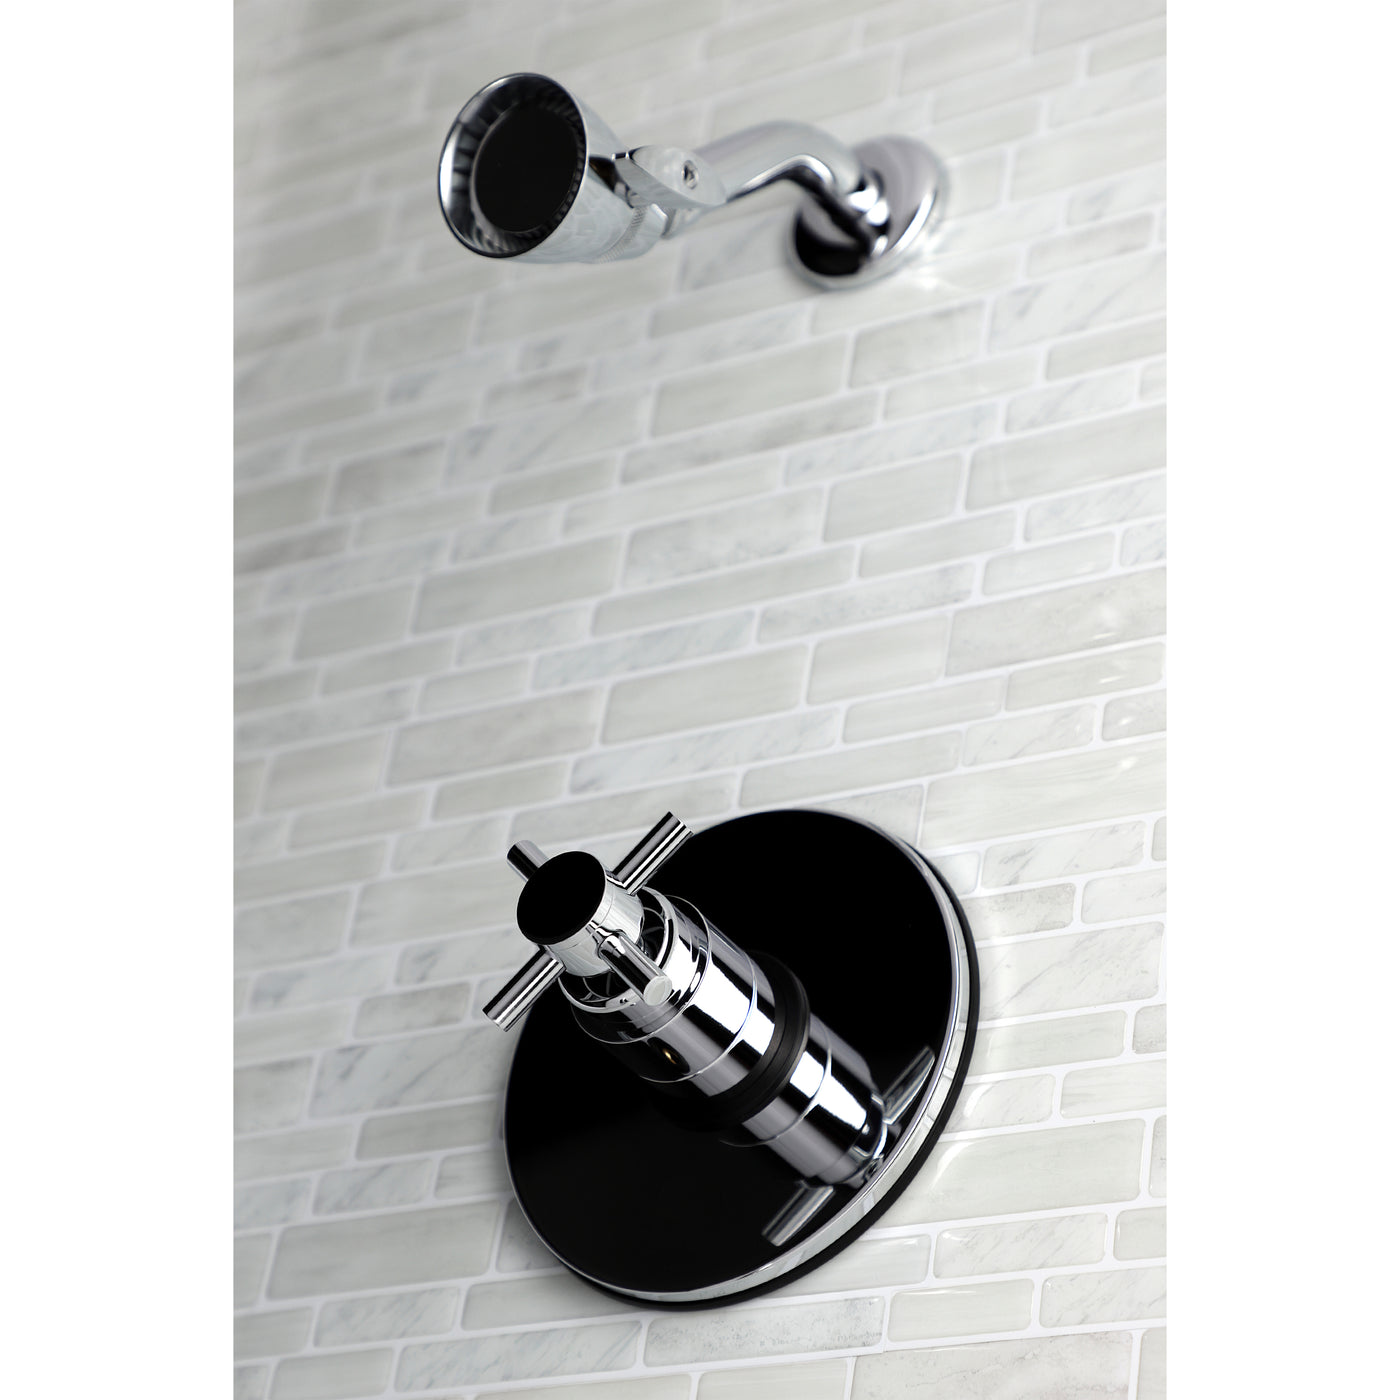 Elements of Design EB8691DXSO Shower Only, Polished Chrome